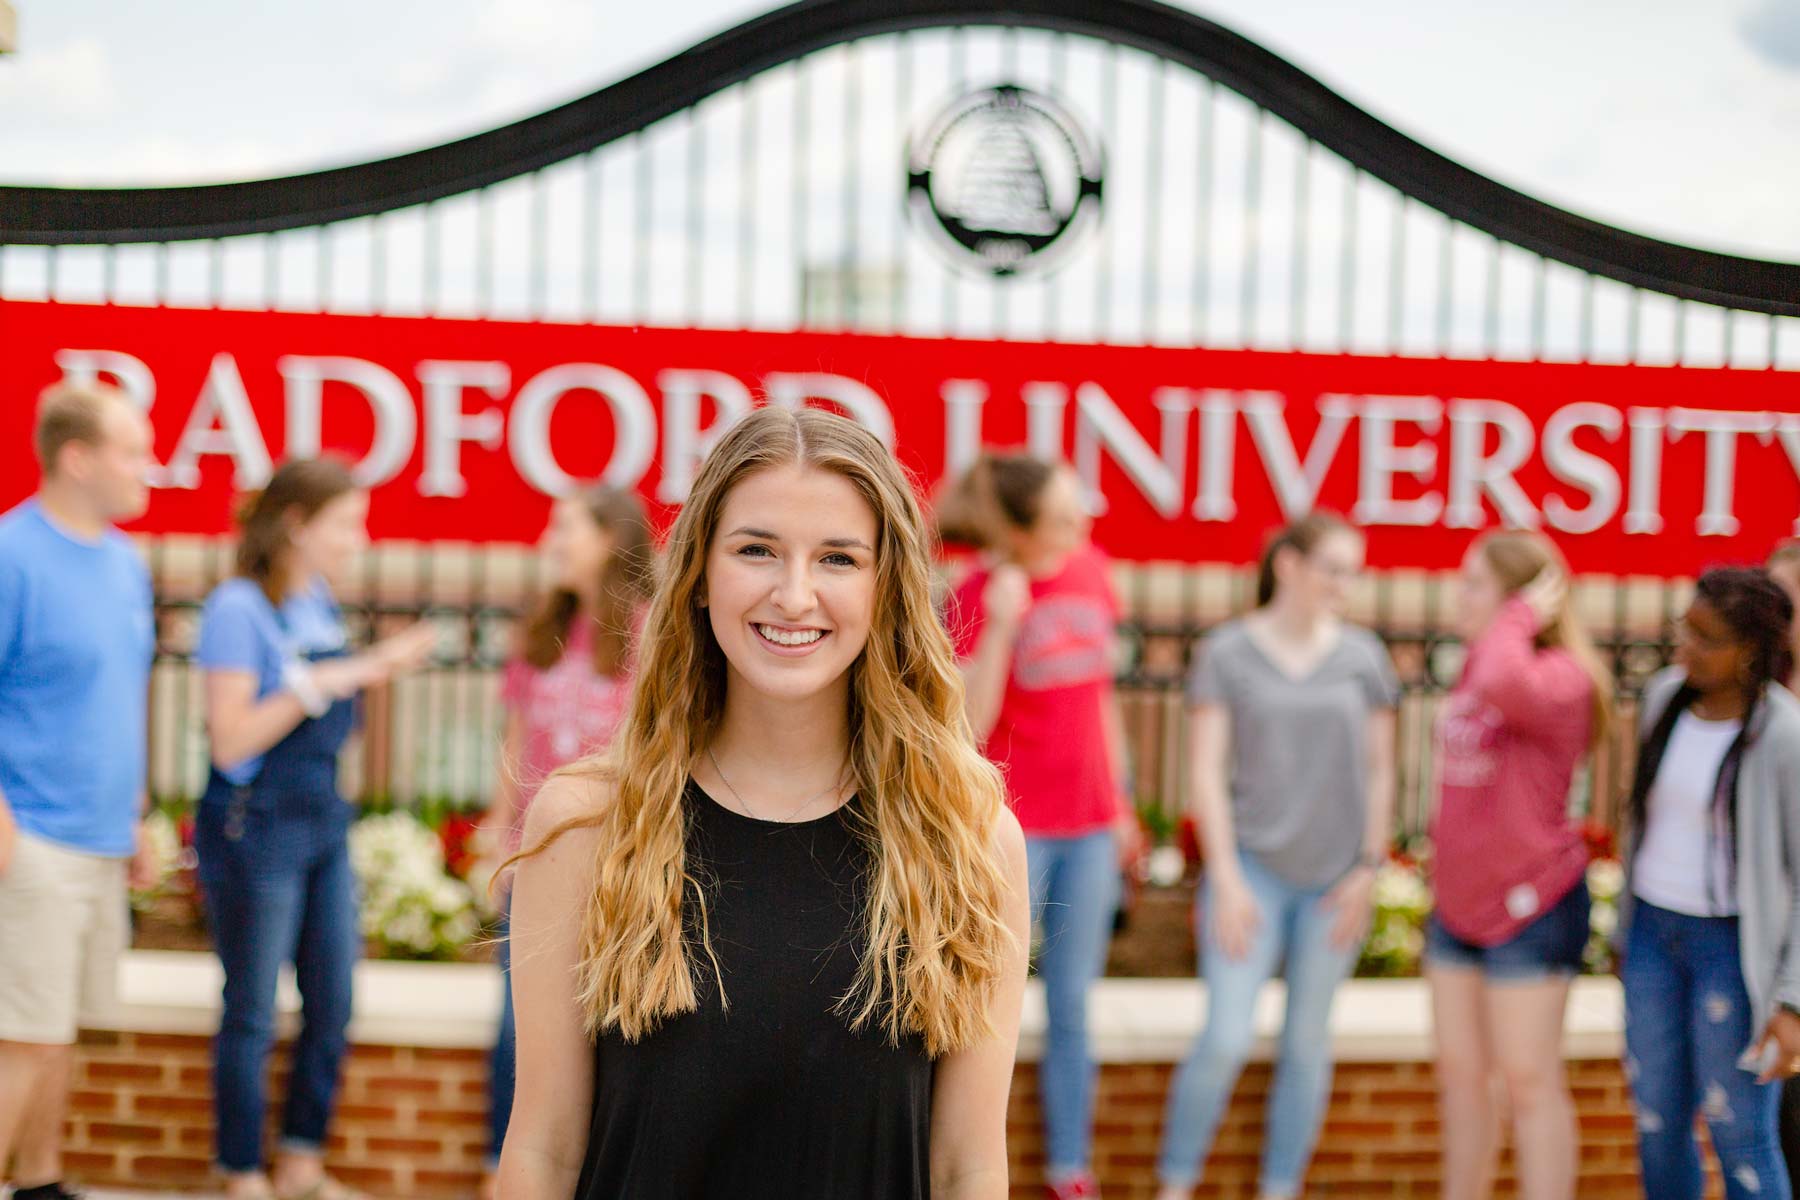 student with peers in front of Radford University entrance